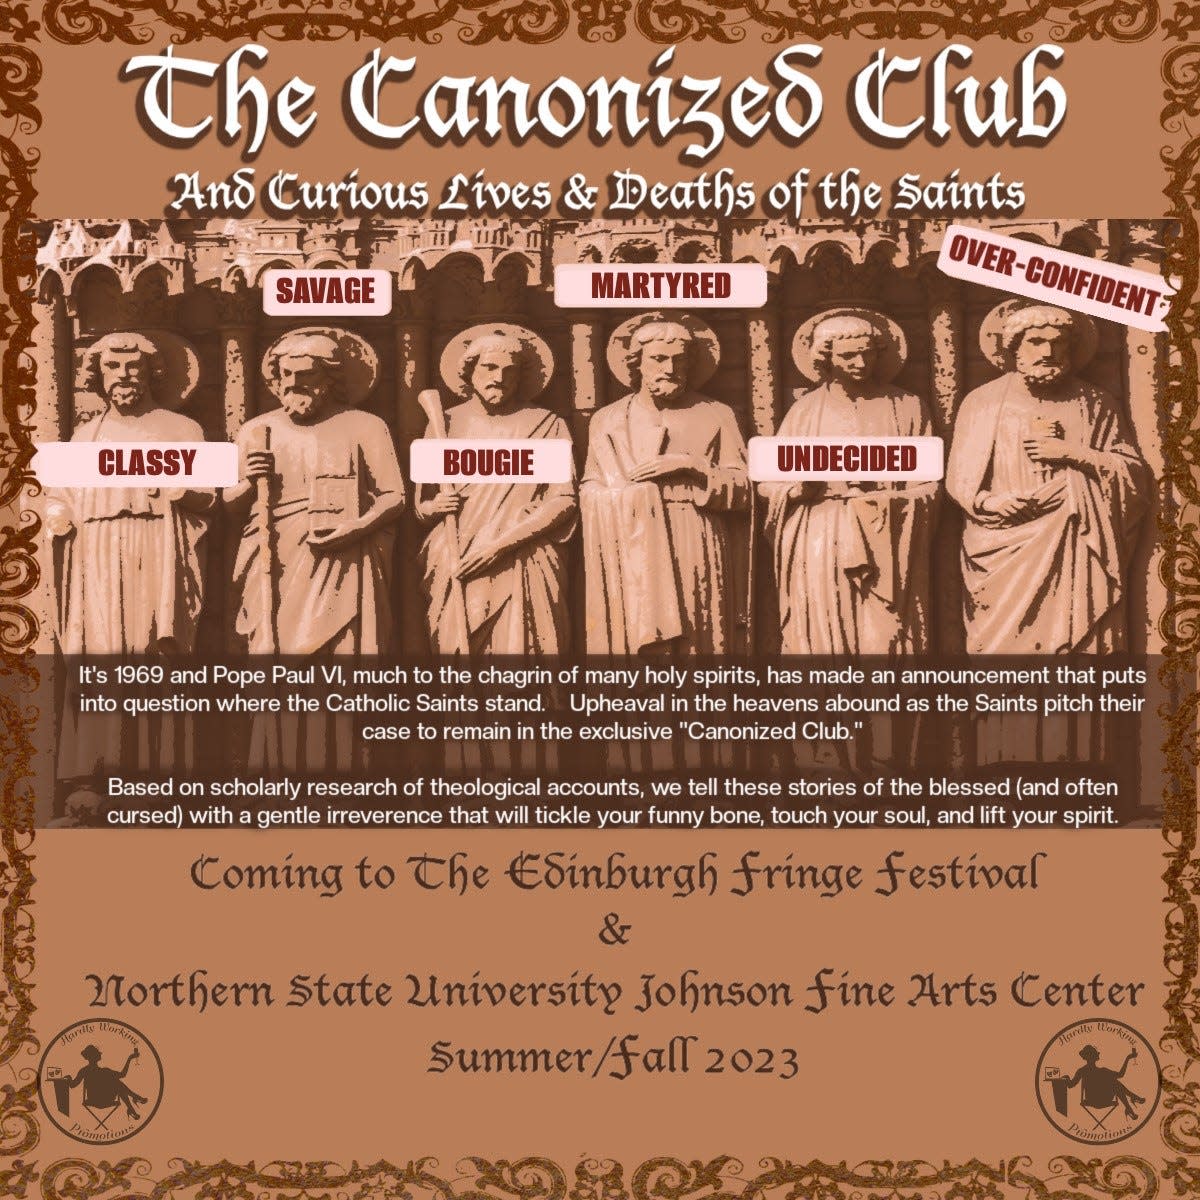 "The Canonized Club and Curious Lives and Deaths of Saints" is a locally written play for Northern State University that will be performed at a fringe festival in Europe.